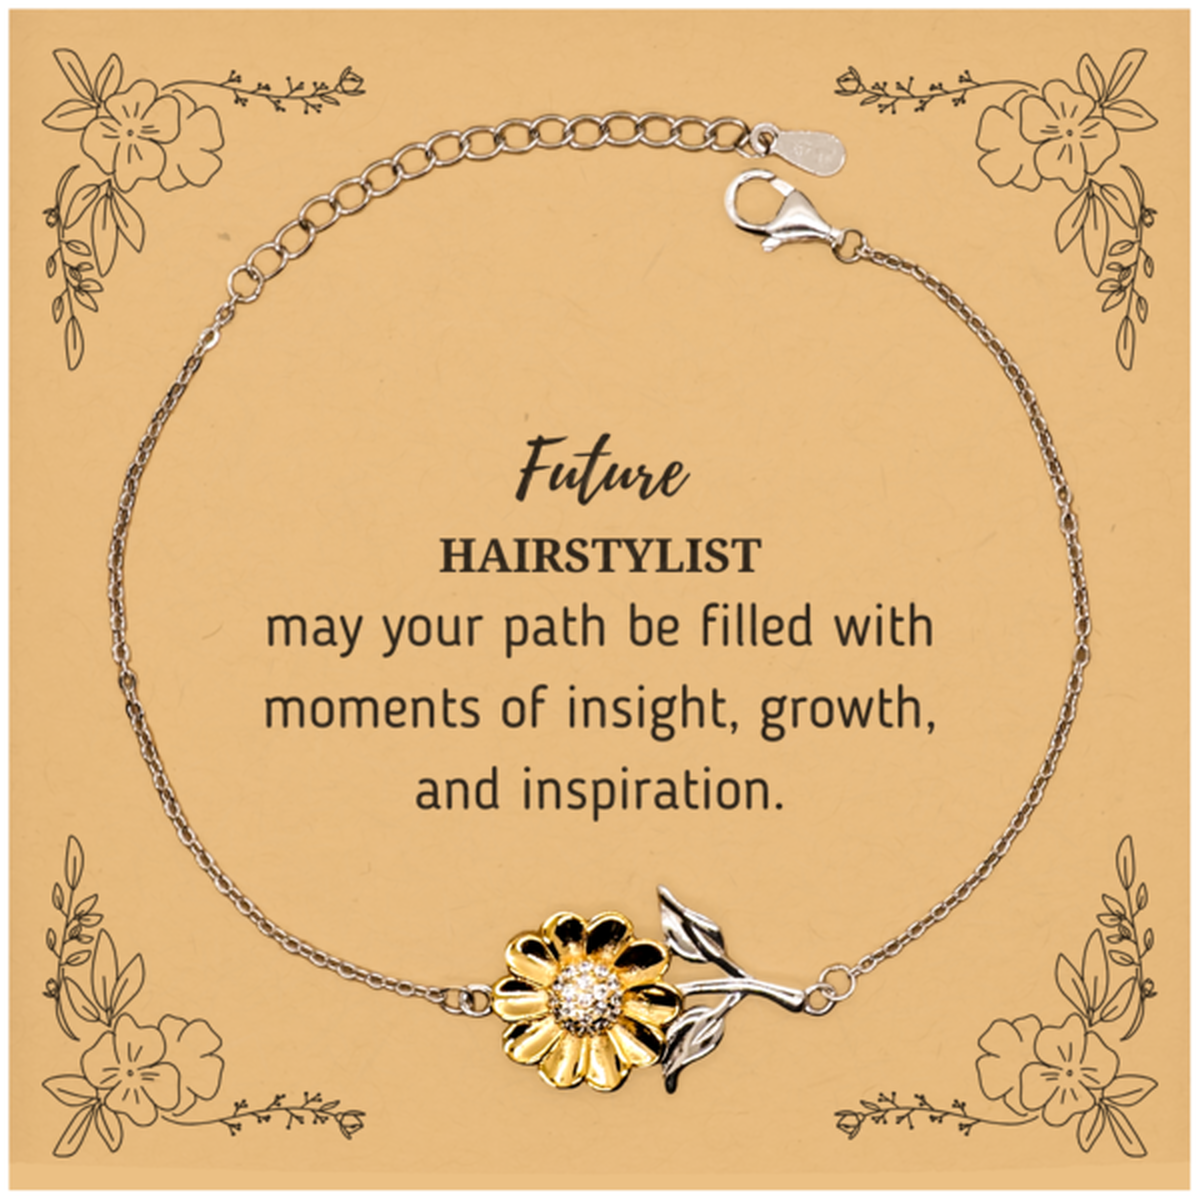 Future Hairstylist Gifts, May your path be filled with moments of insight, Graduation Gifts for New Hairstylist, Christmas Unique Sunflower Bracelet For Men, Women, Friends